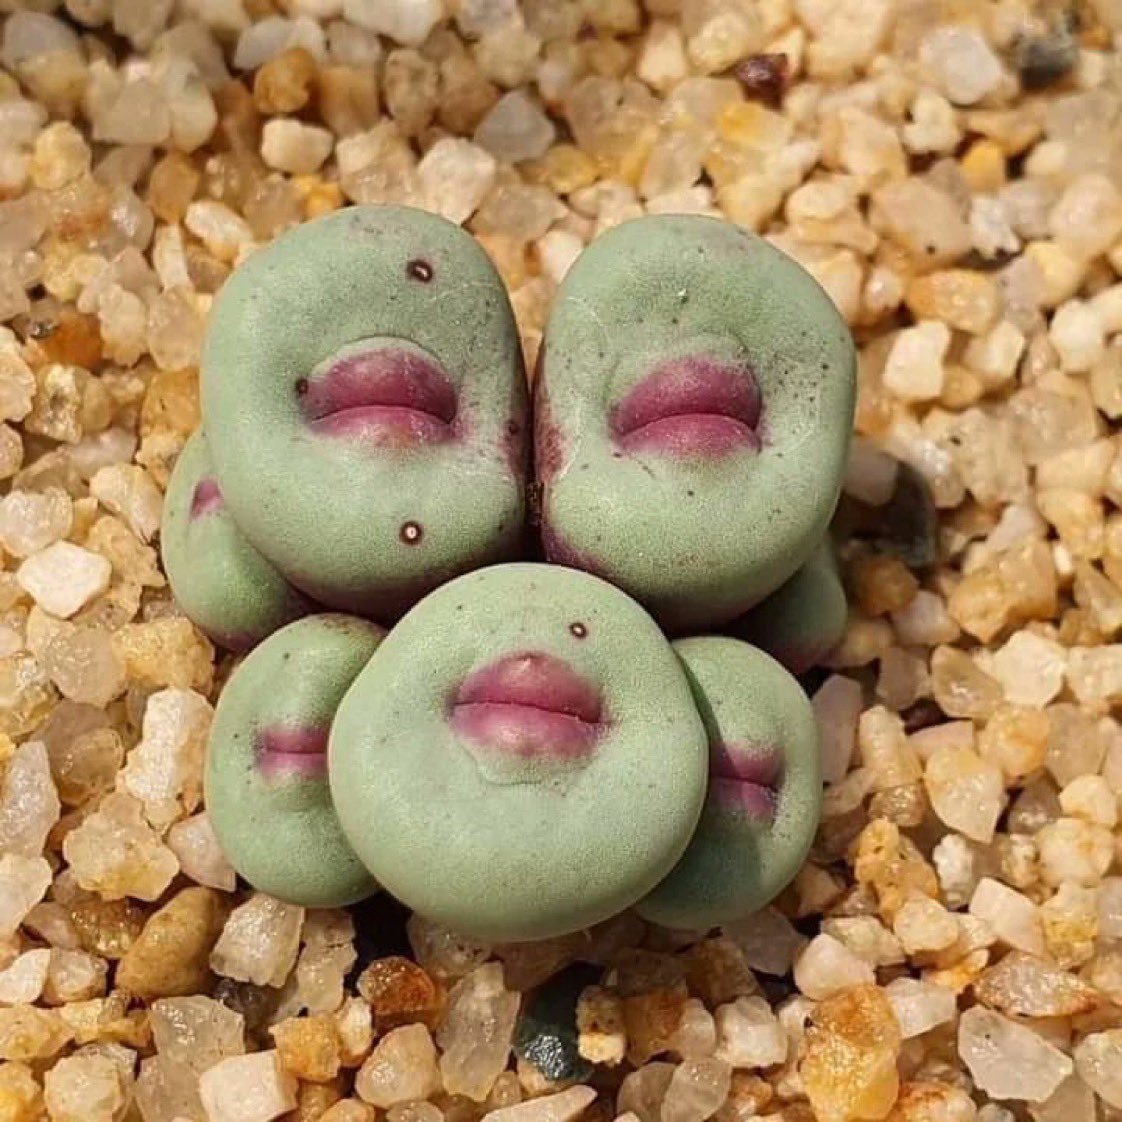 Conophytum pageae, 

An almost stemless succulent plant producing leaves that are spherical with dimples that resemble lips, these are the opening from which the flowers will sprout 

Source of images 
1 bit.ly/3aXPaJC
2 bit.ly/3J3ZcoN